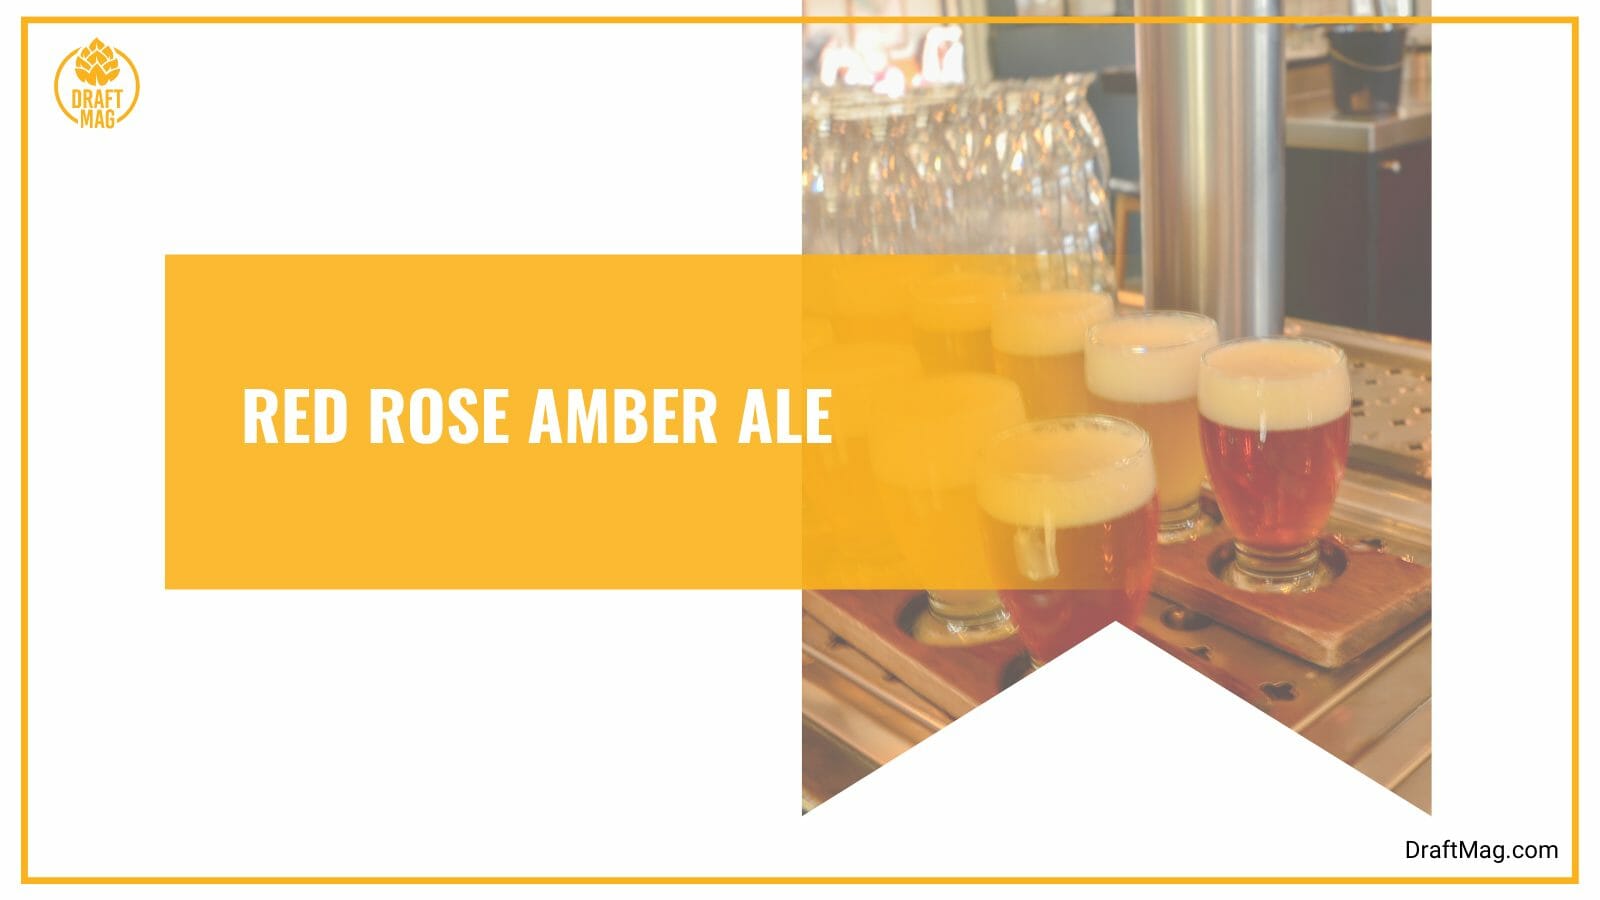 Red rose amber ale